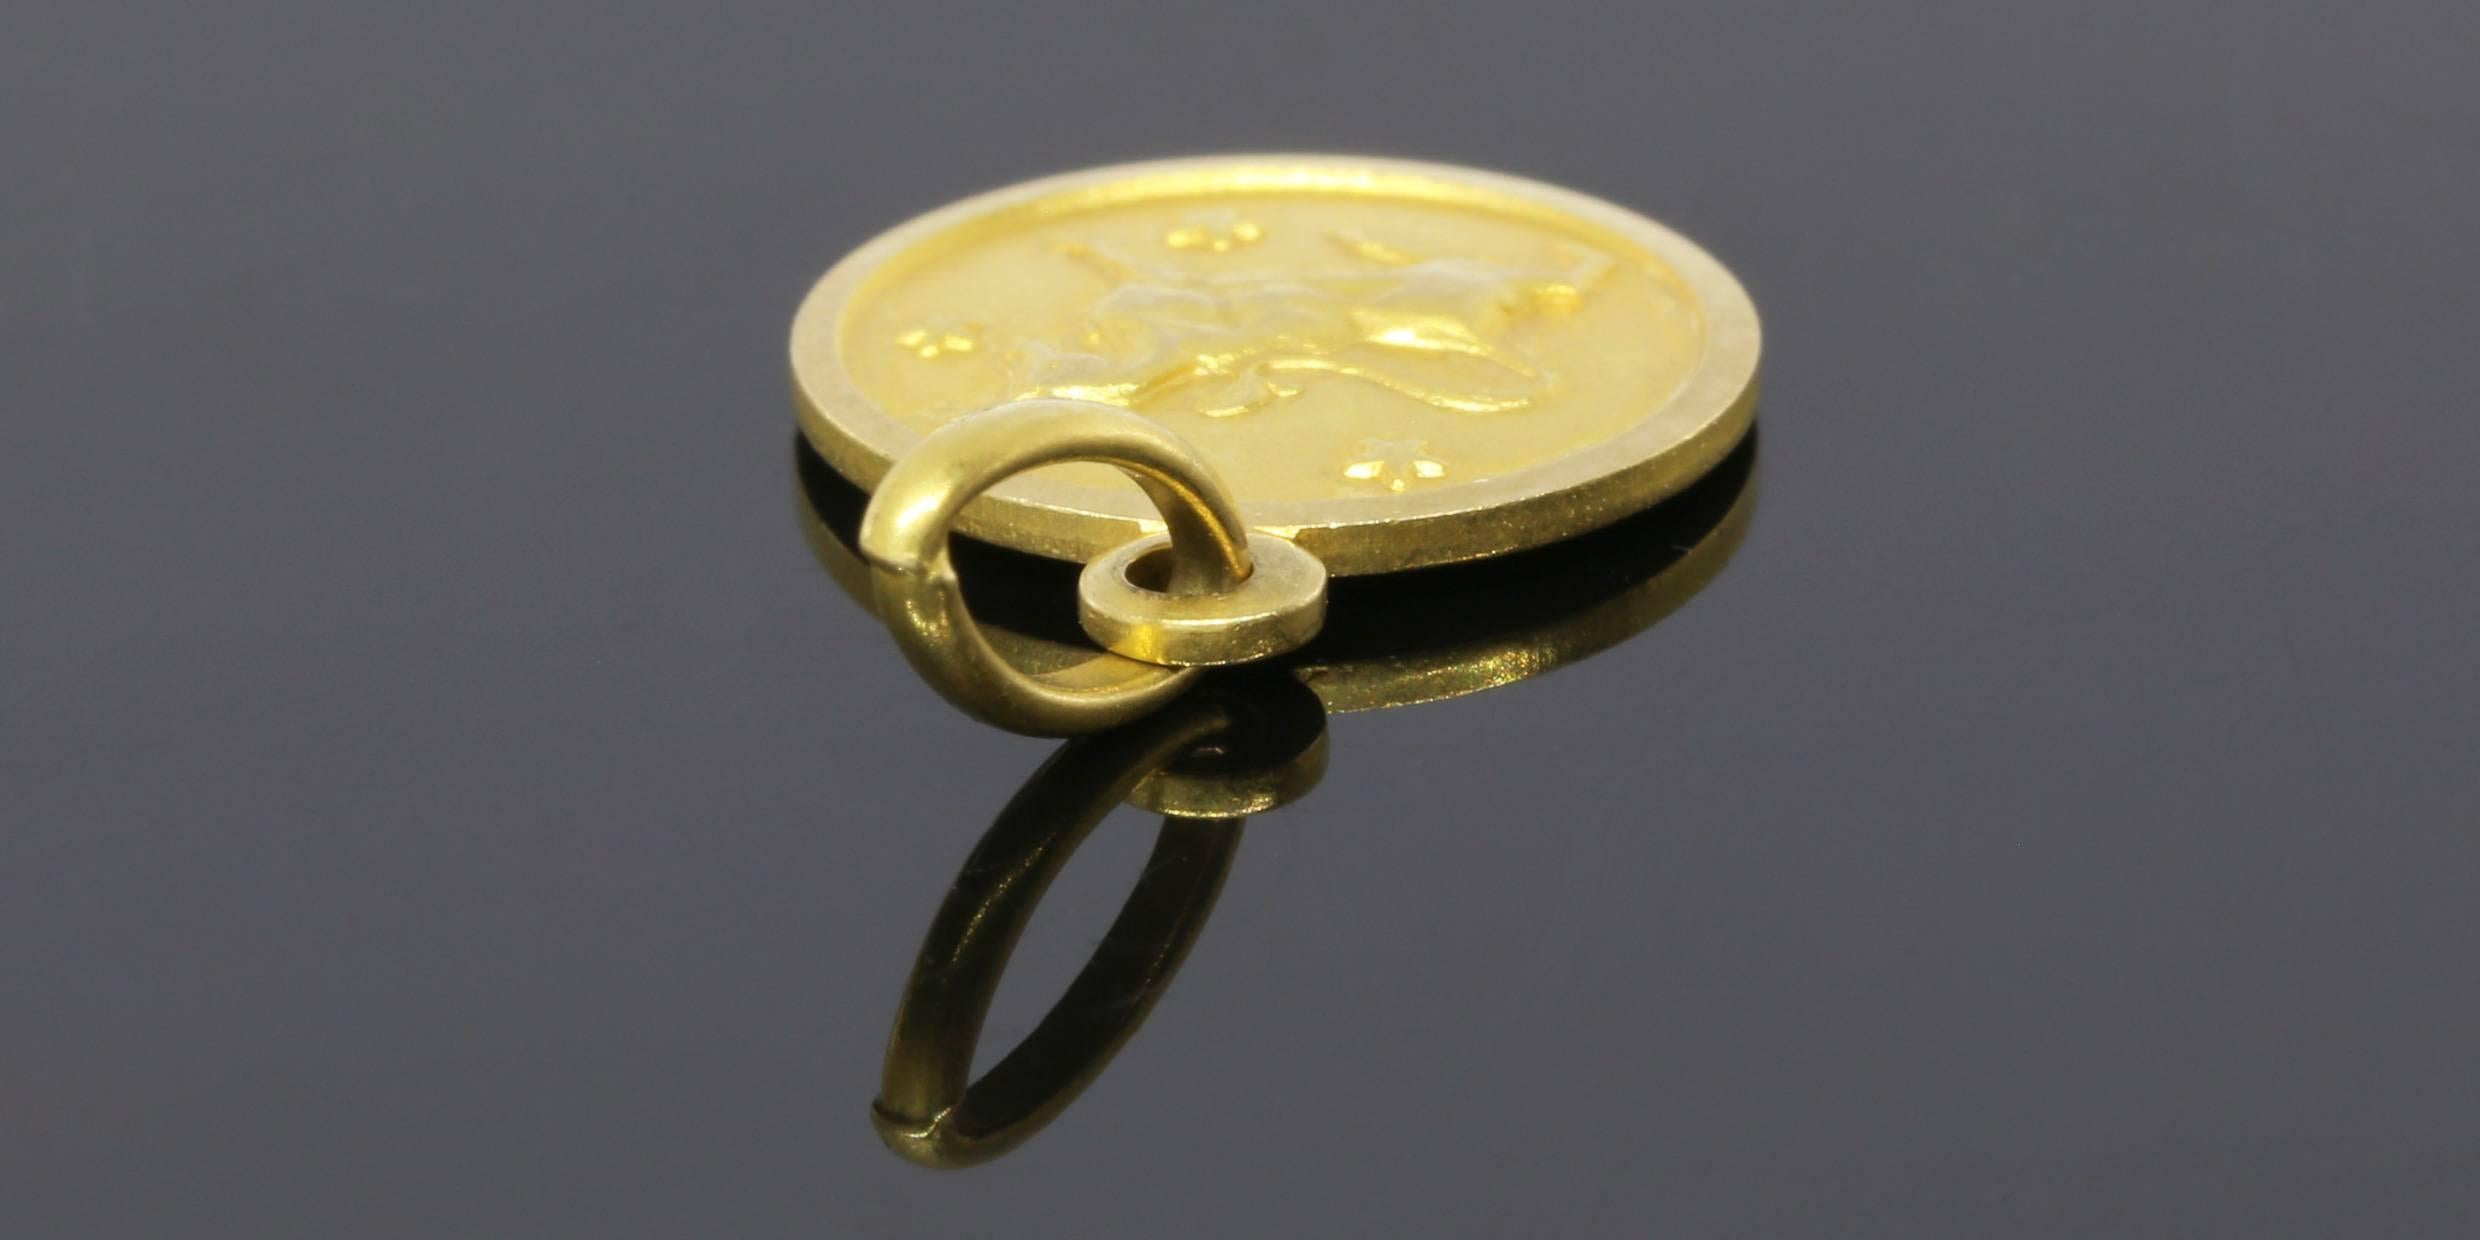 This small, 18 karat yellow gold, round charm features a powerful & proud bull with a matte finish & stars in the background. The bull is the Zodiac symbol for Taurus (April 20 - May 20). The charm measures approximately 20 millimeters in length